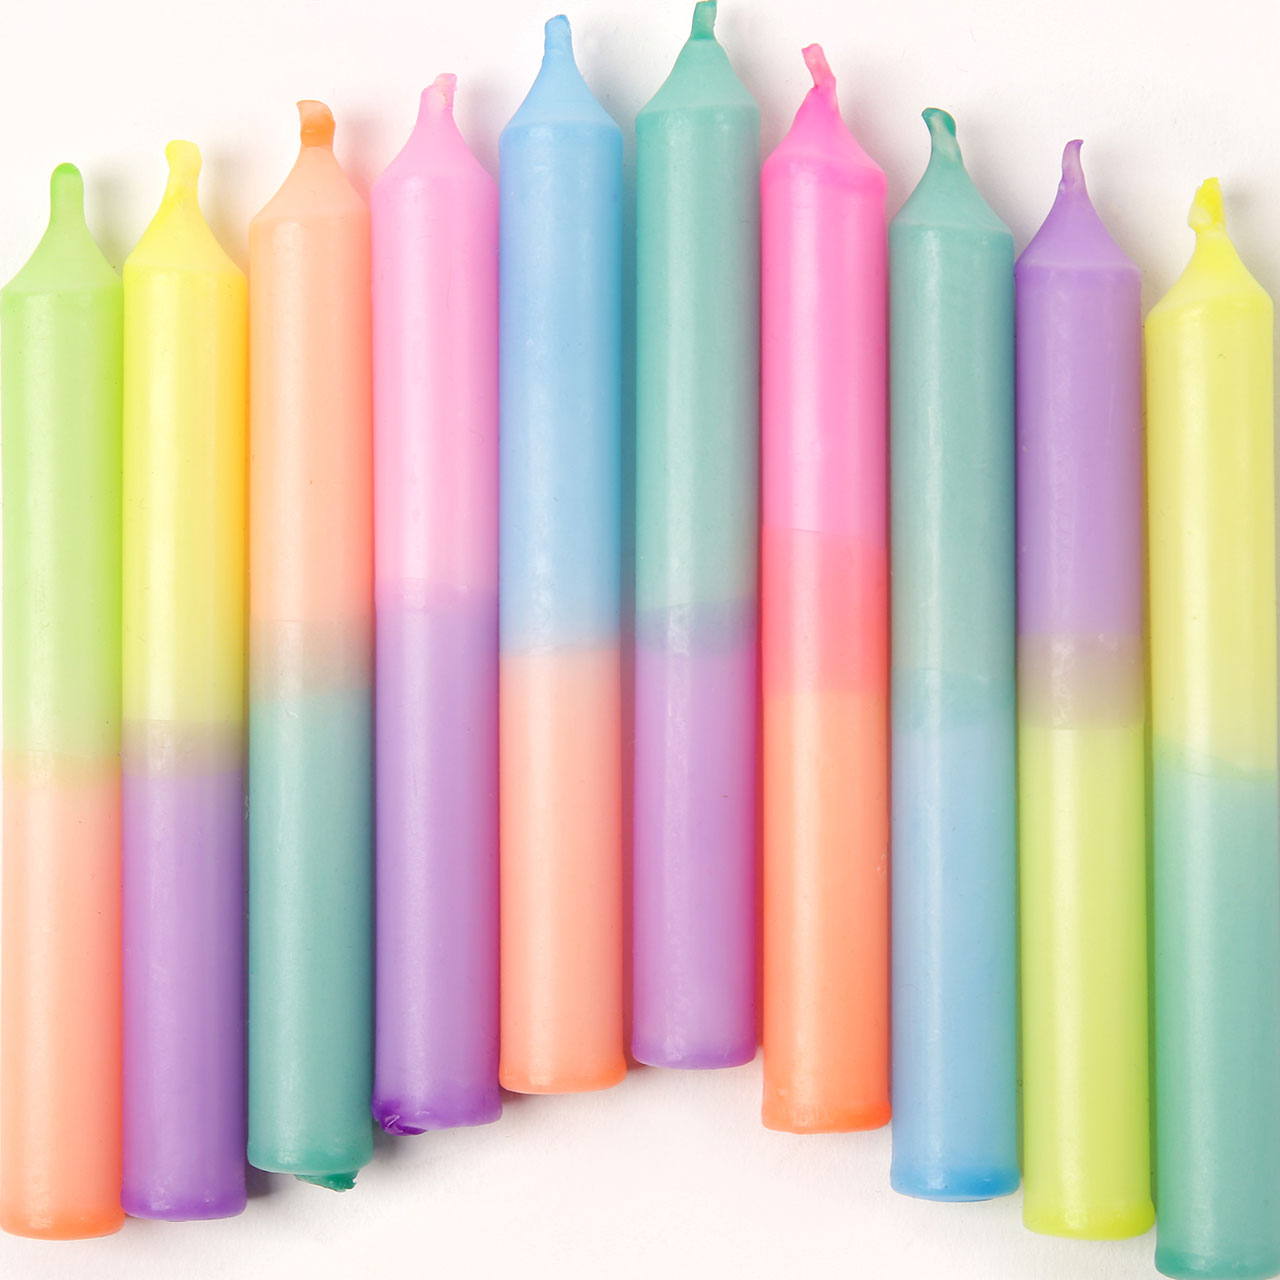 Candles - Rainbow Dipped 